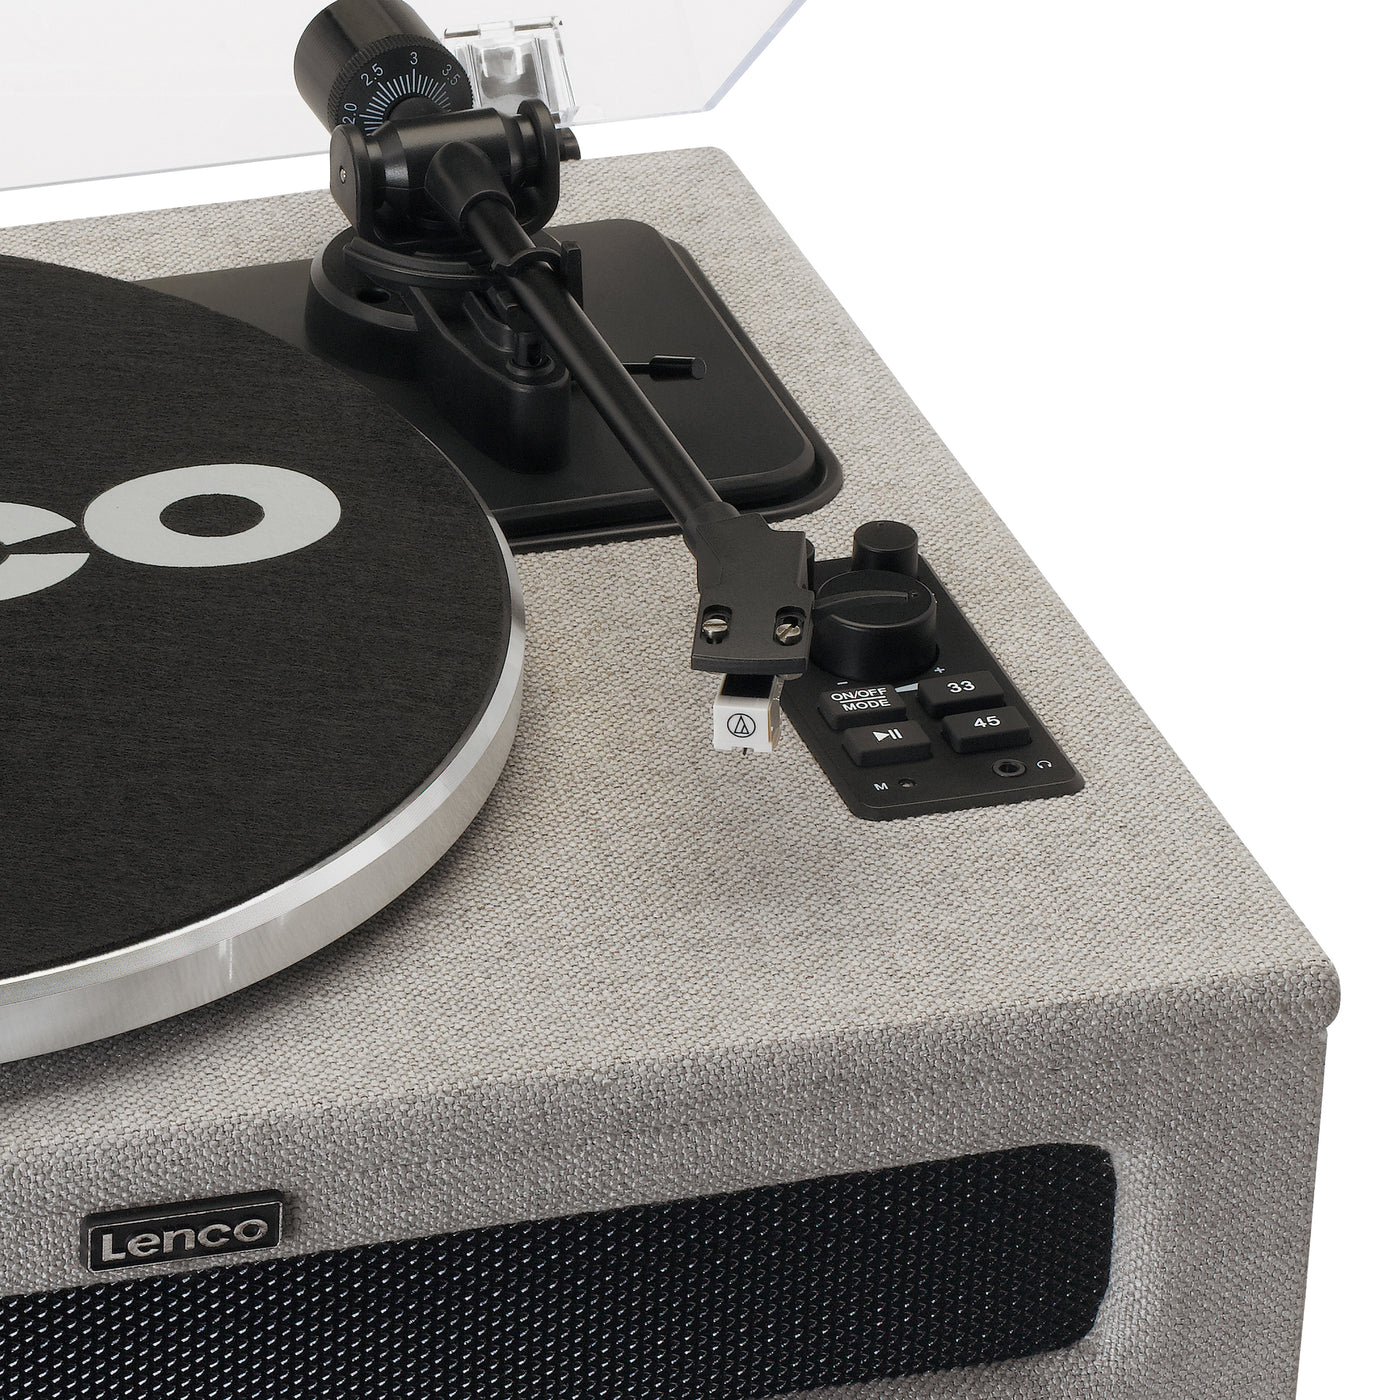 LENCO LS-440GY - Turntable with 4 built-in speakers - Fabric